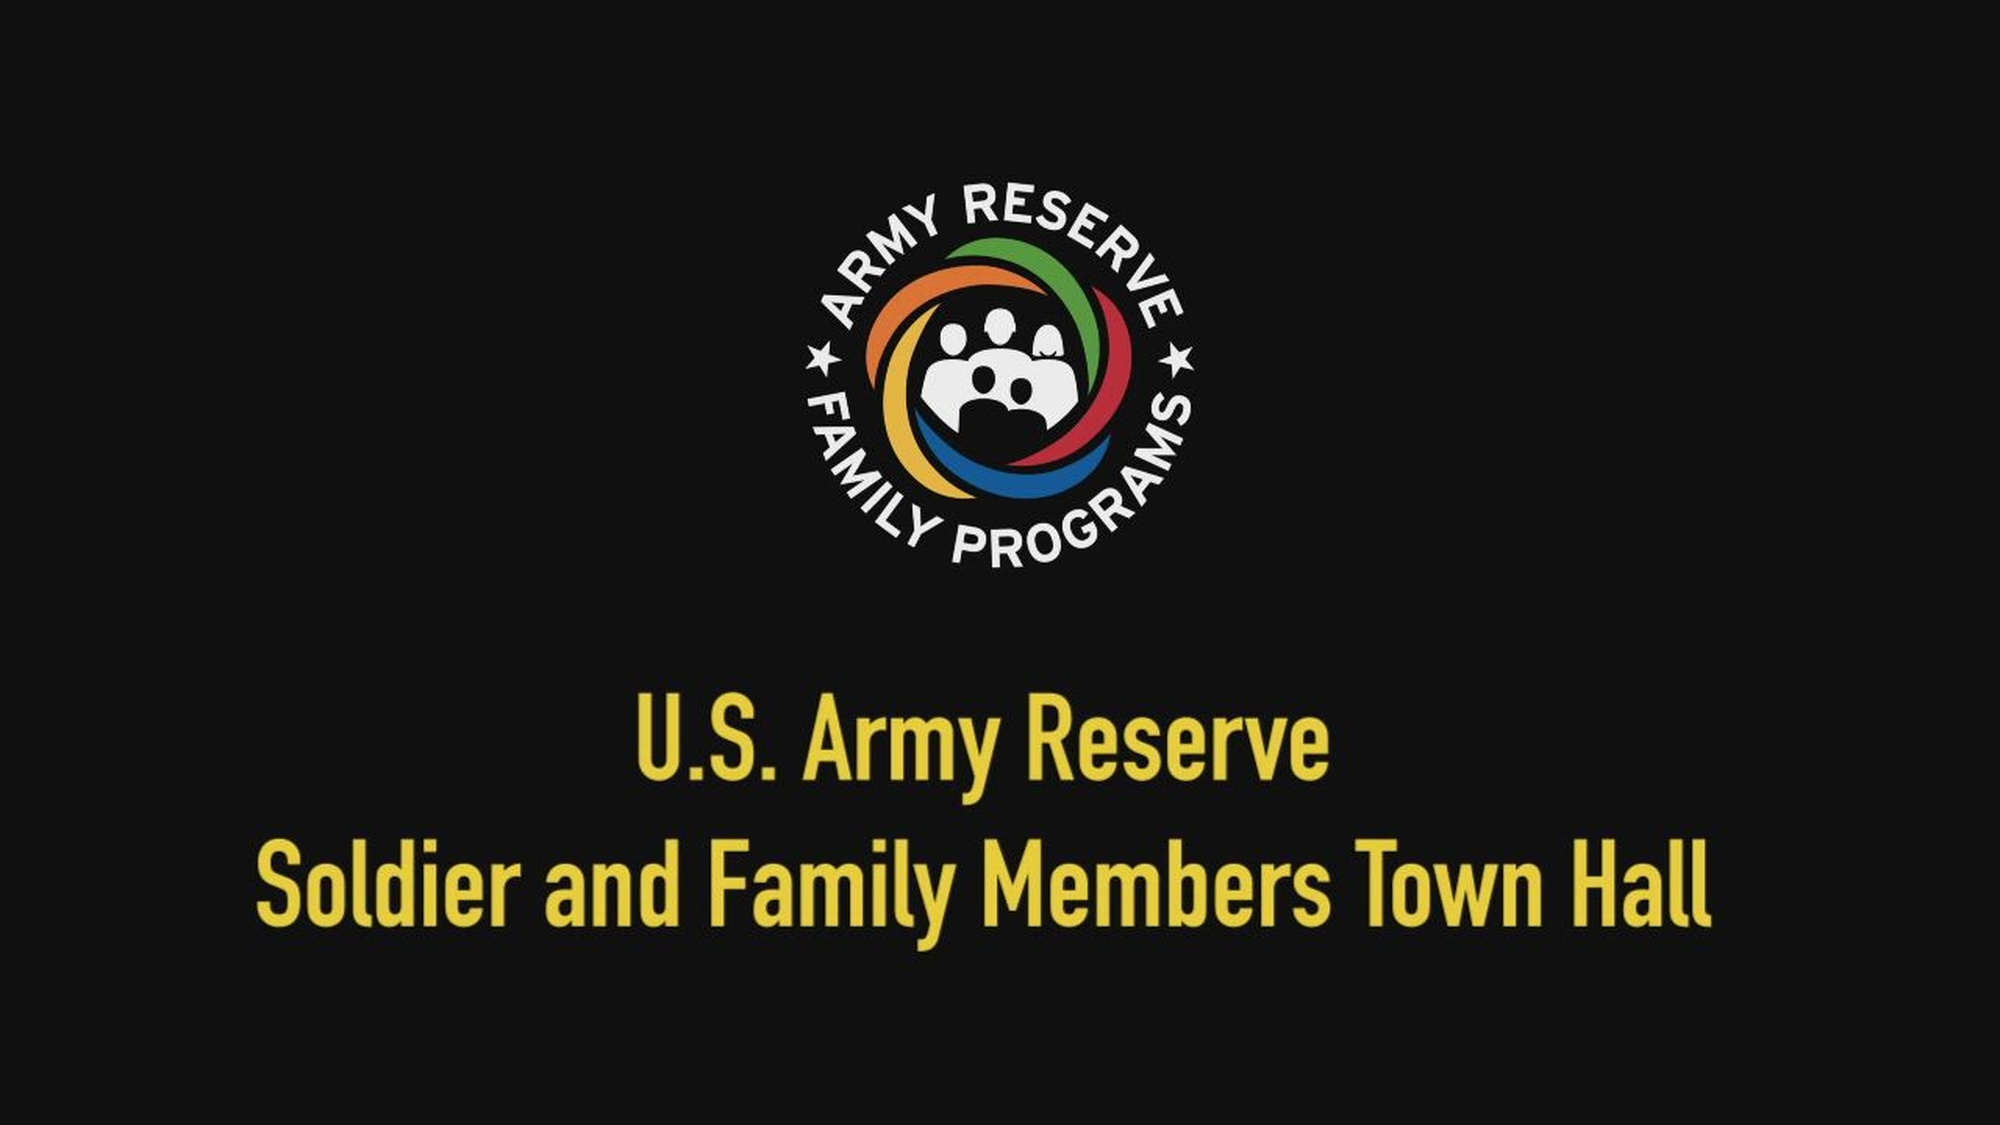 Family Programs Town Hall VII
Military Child Education Coalition and Financial Readiness 